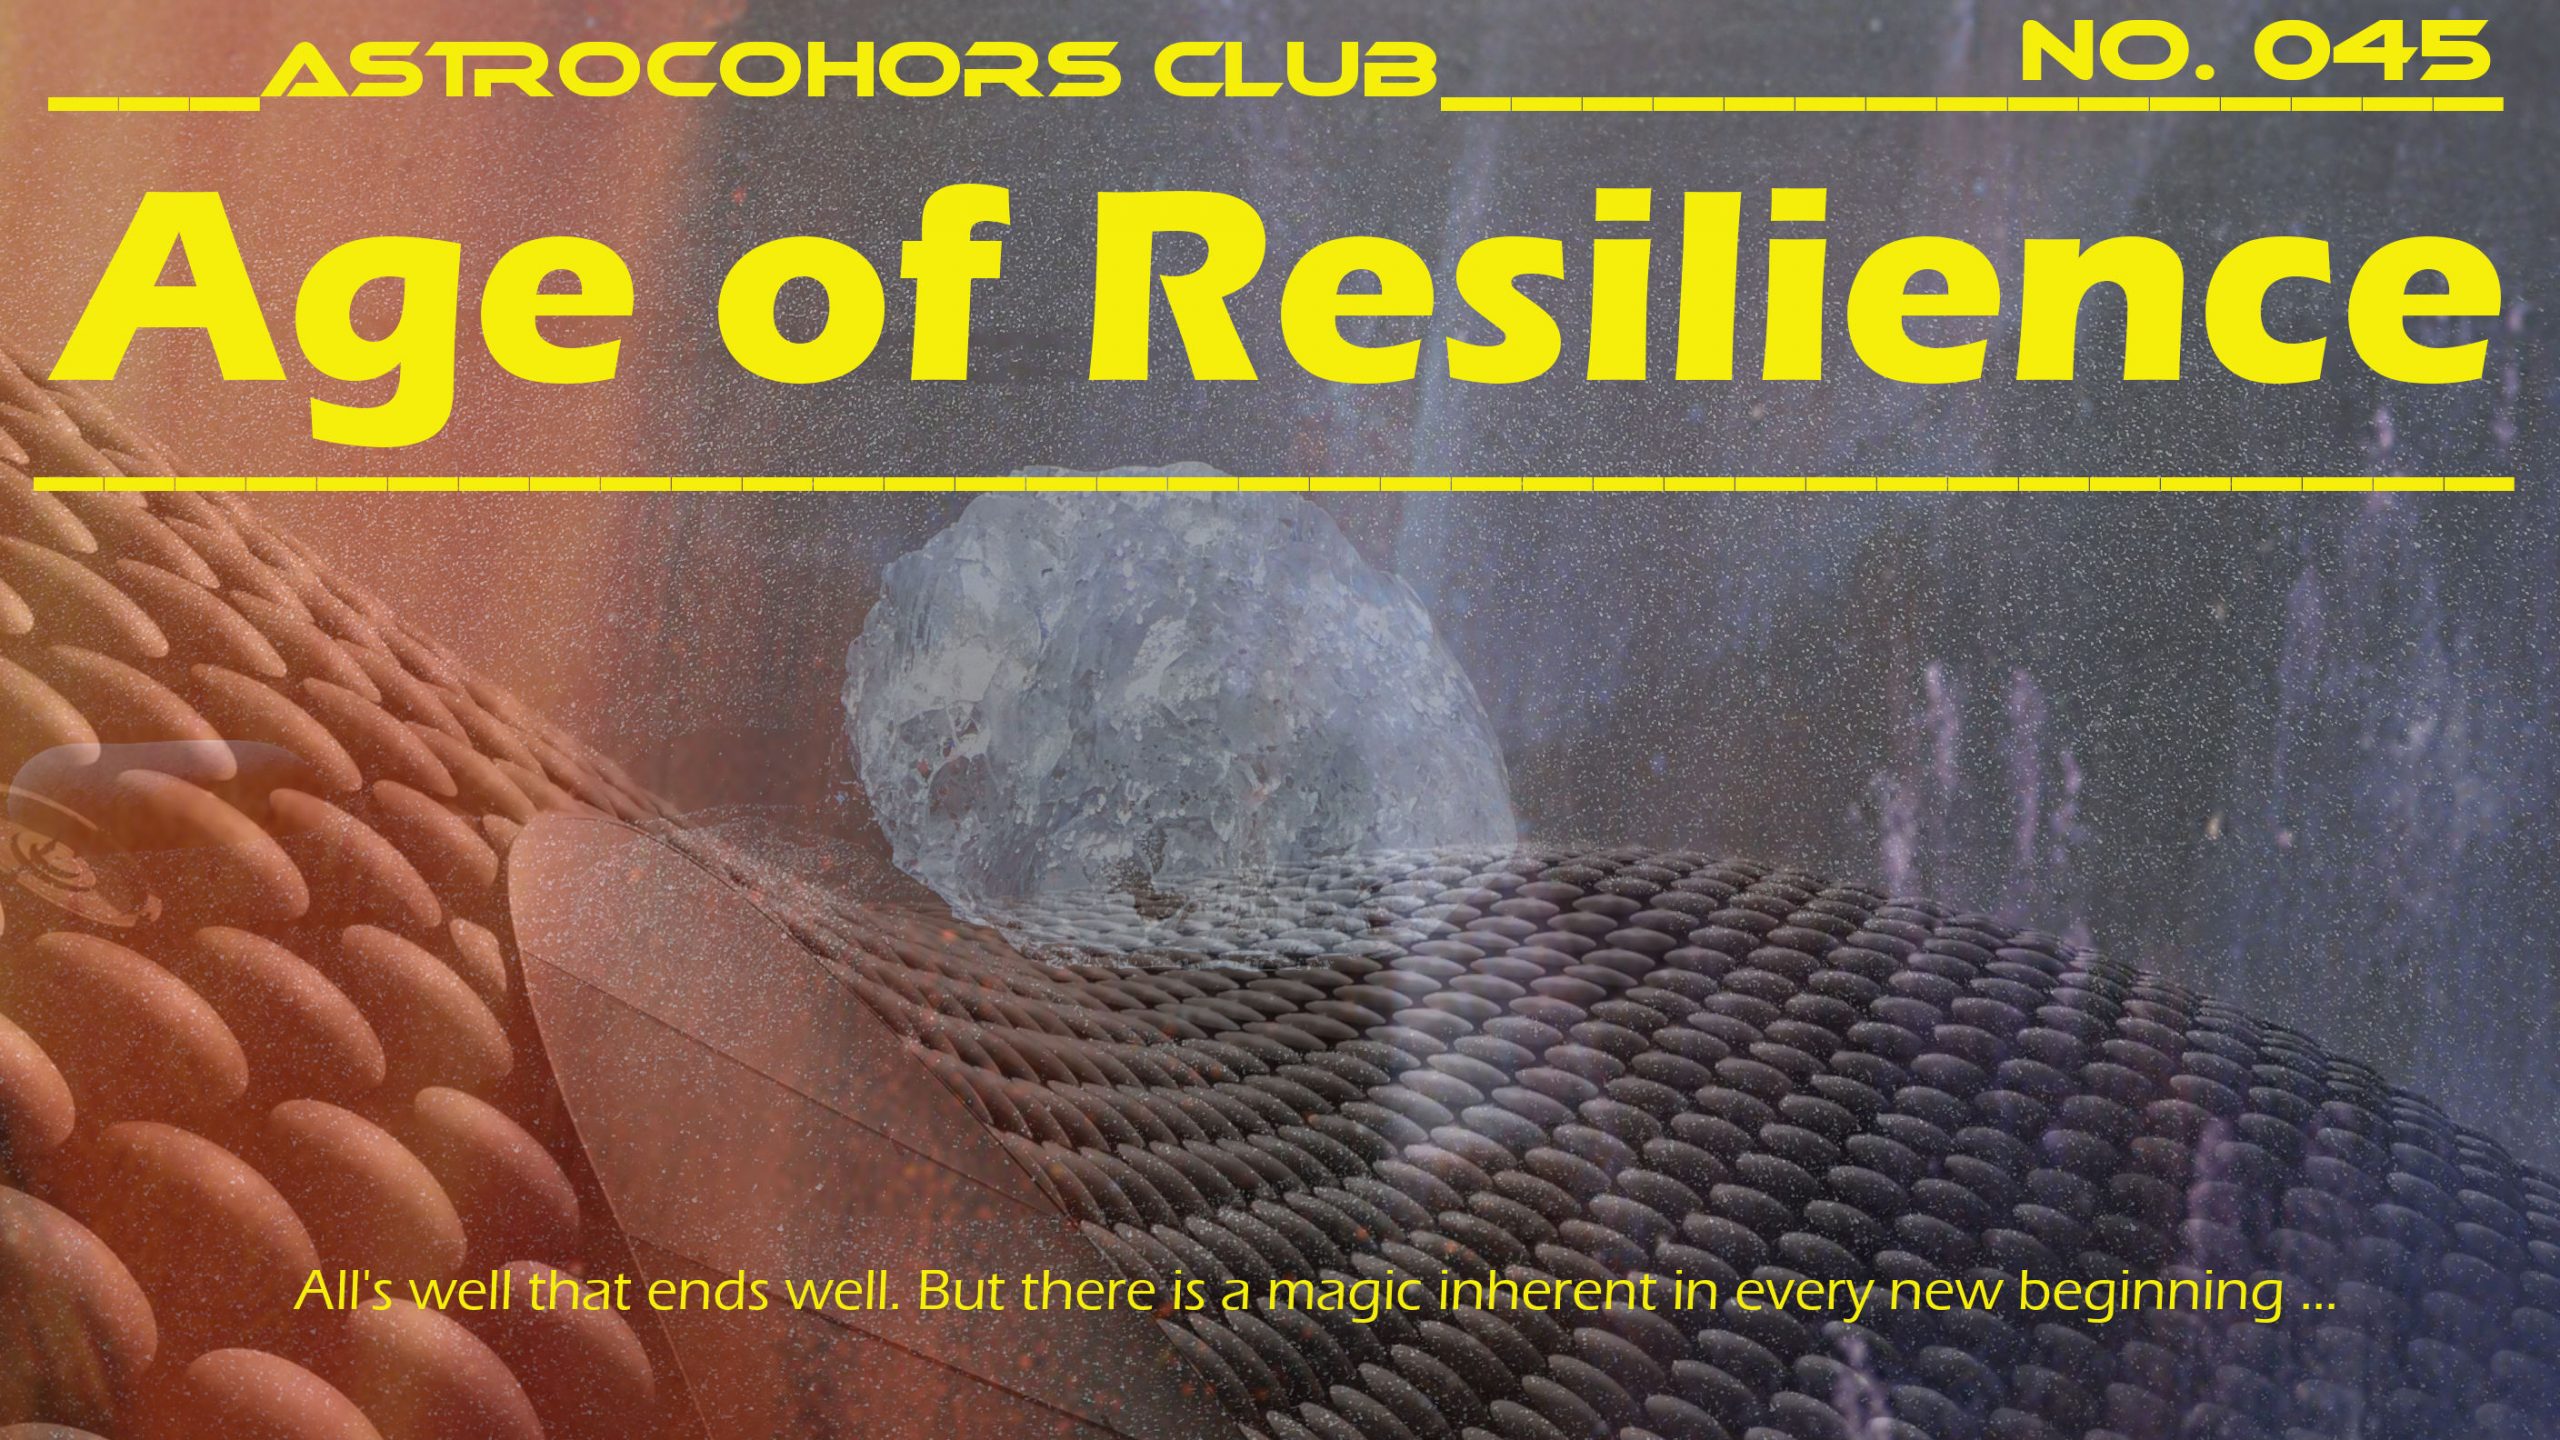 ASTROCOHORS CLUB No. 045: Age of Resilience